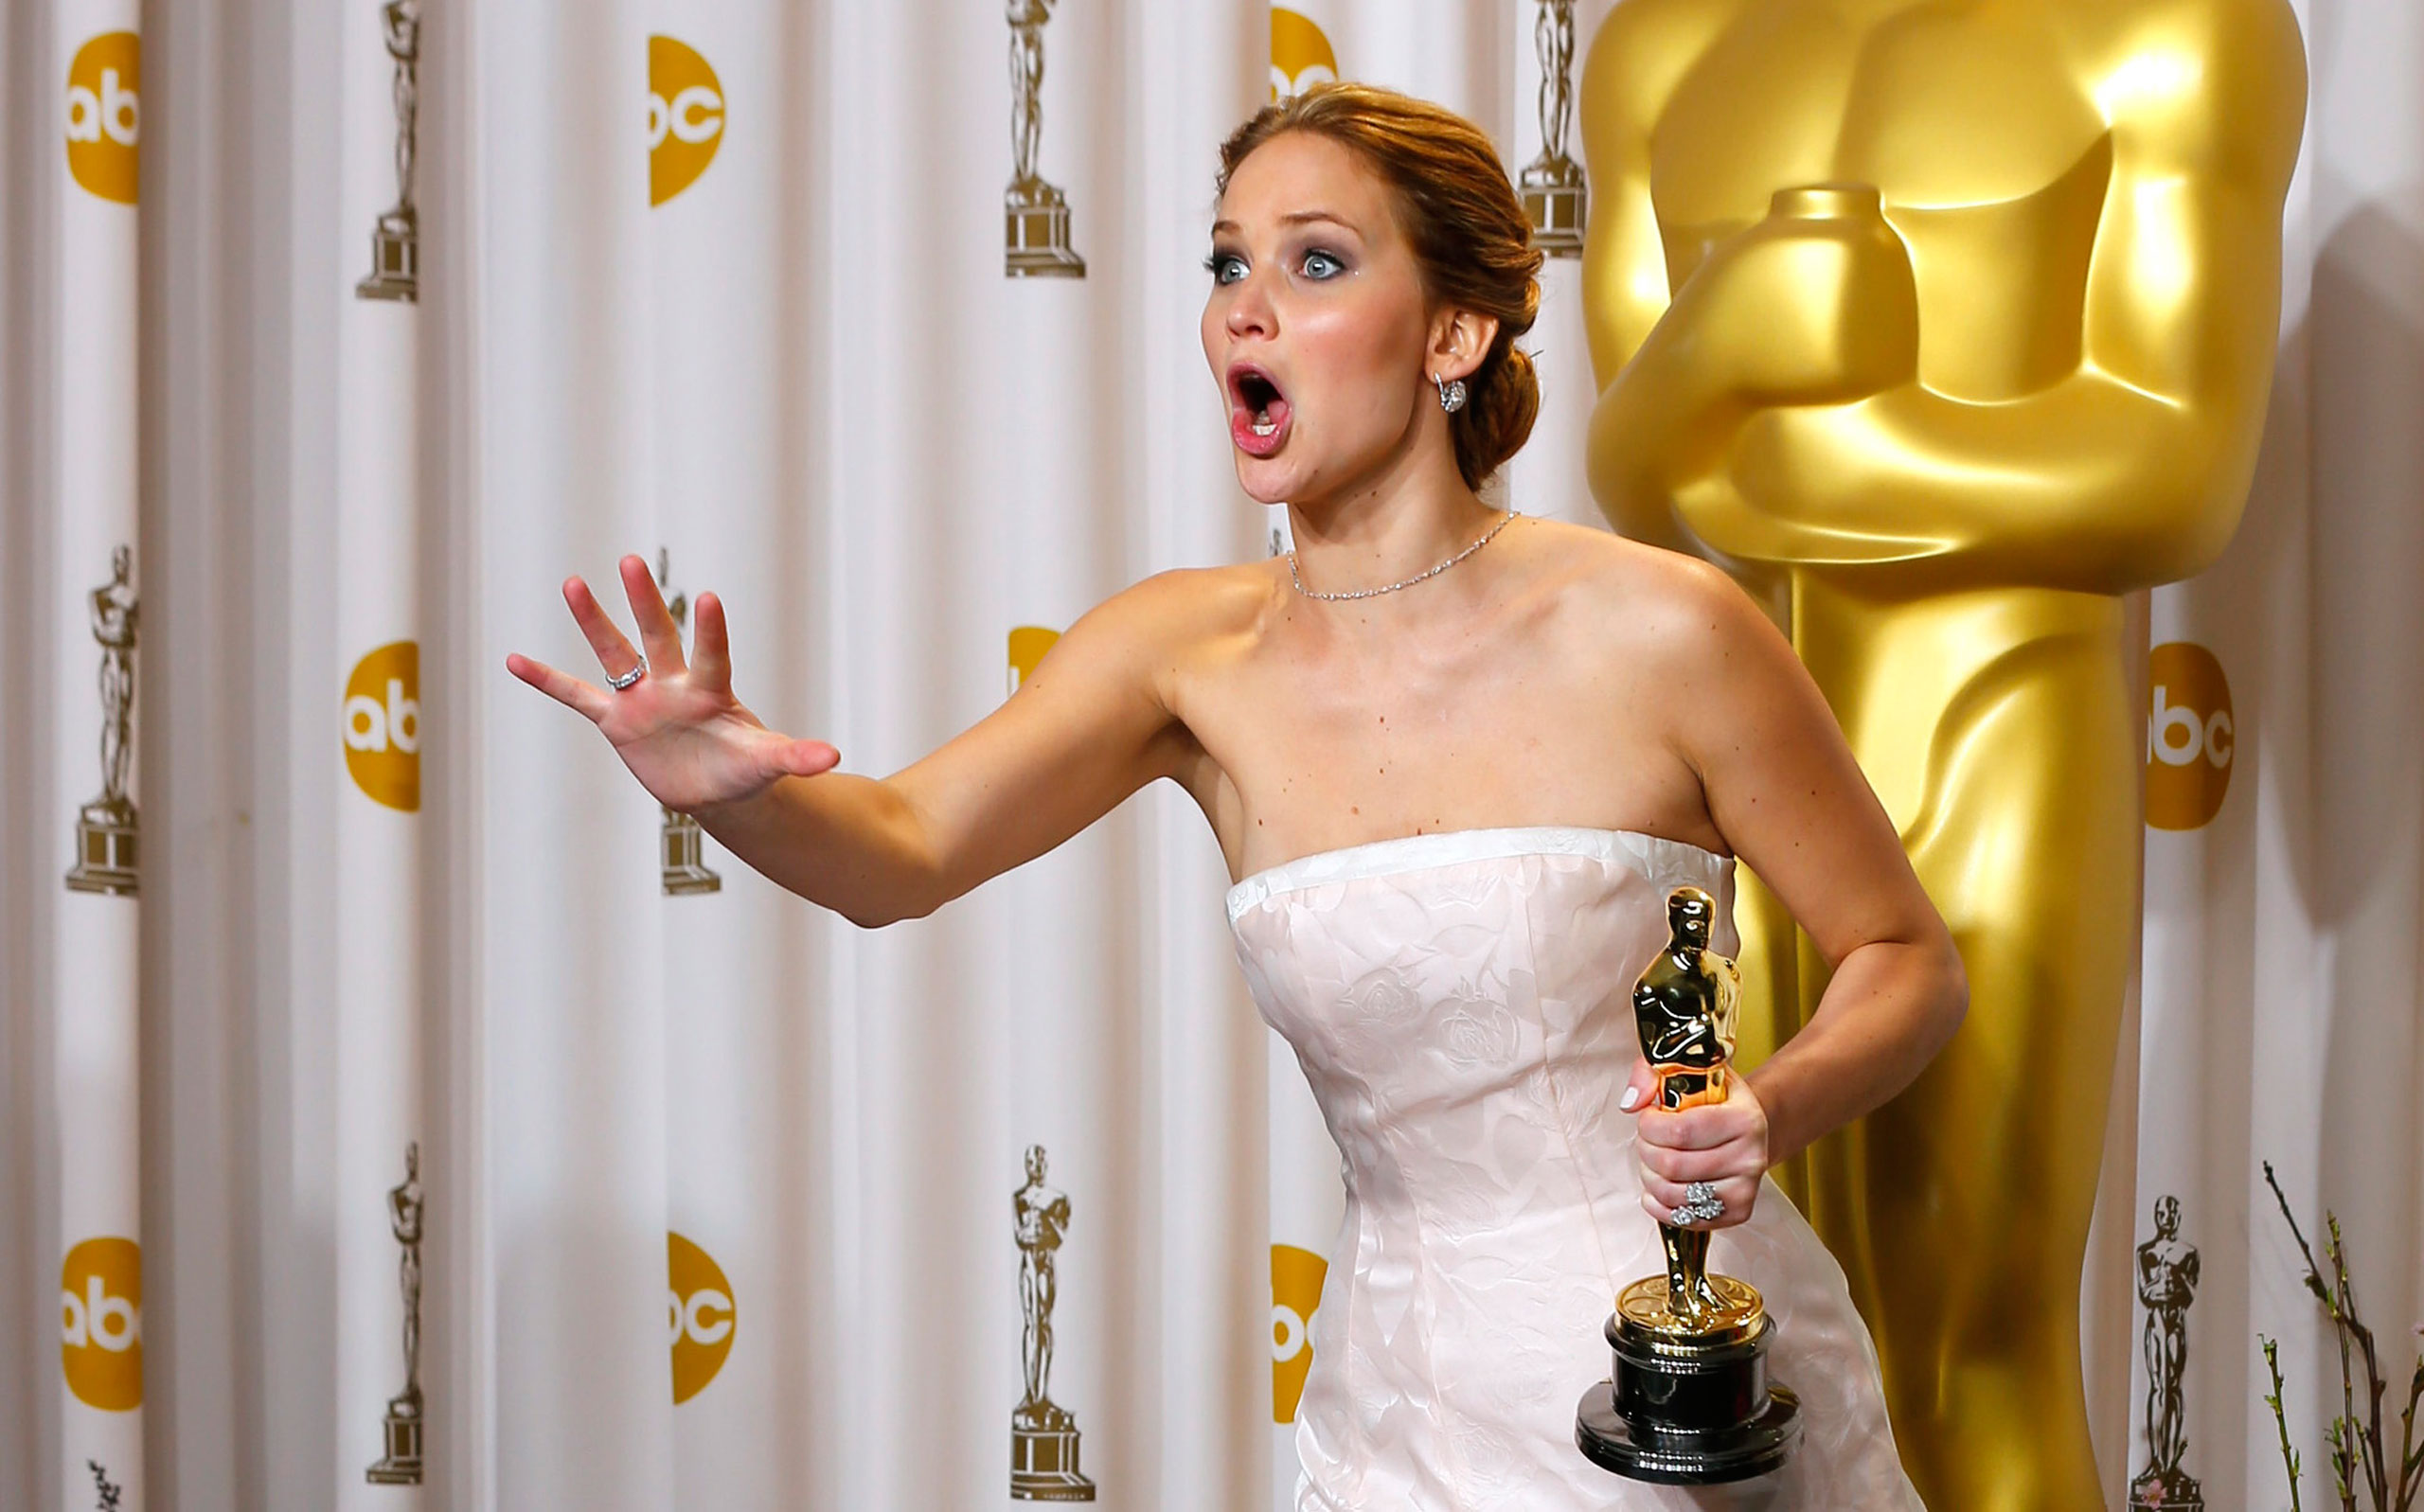 Jennifer Lawrence, best actress winner for her role in  Silver Linings Playbook,  reacts after photographers take a picture of her backstage at the 85th Academy Awards in Hollywood, California February 24, 2013.